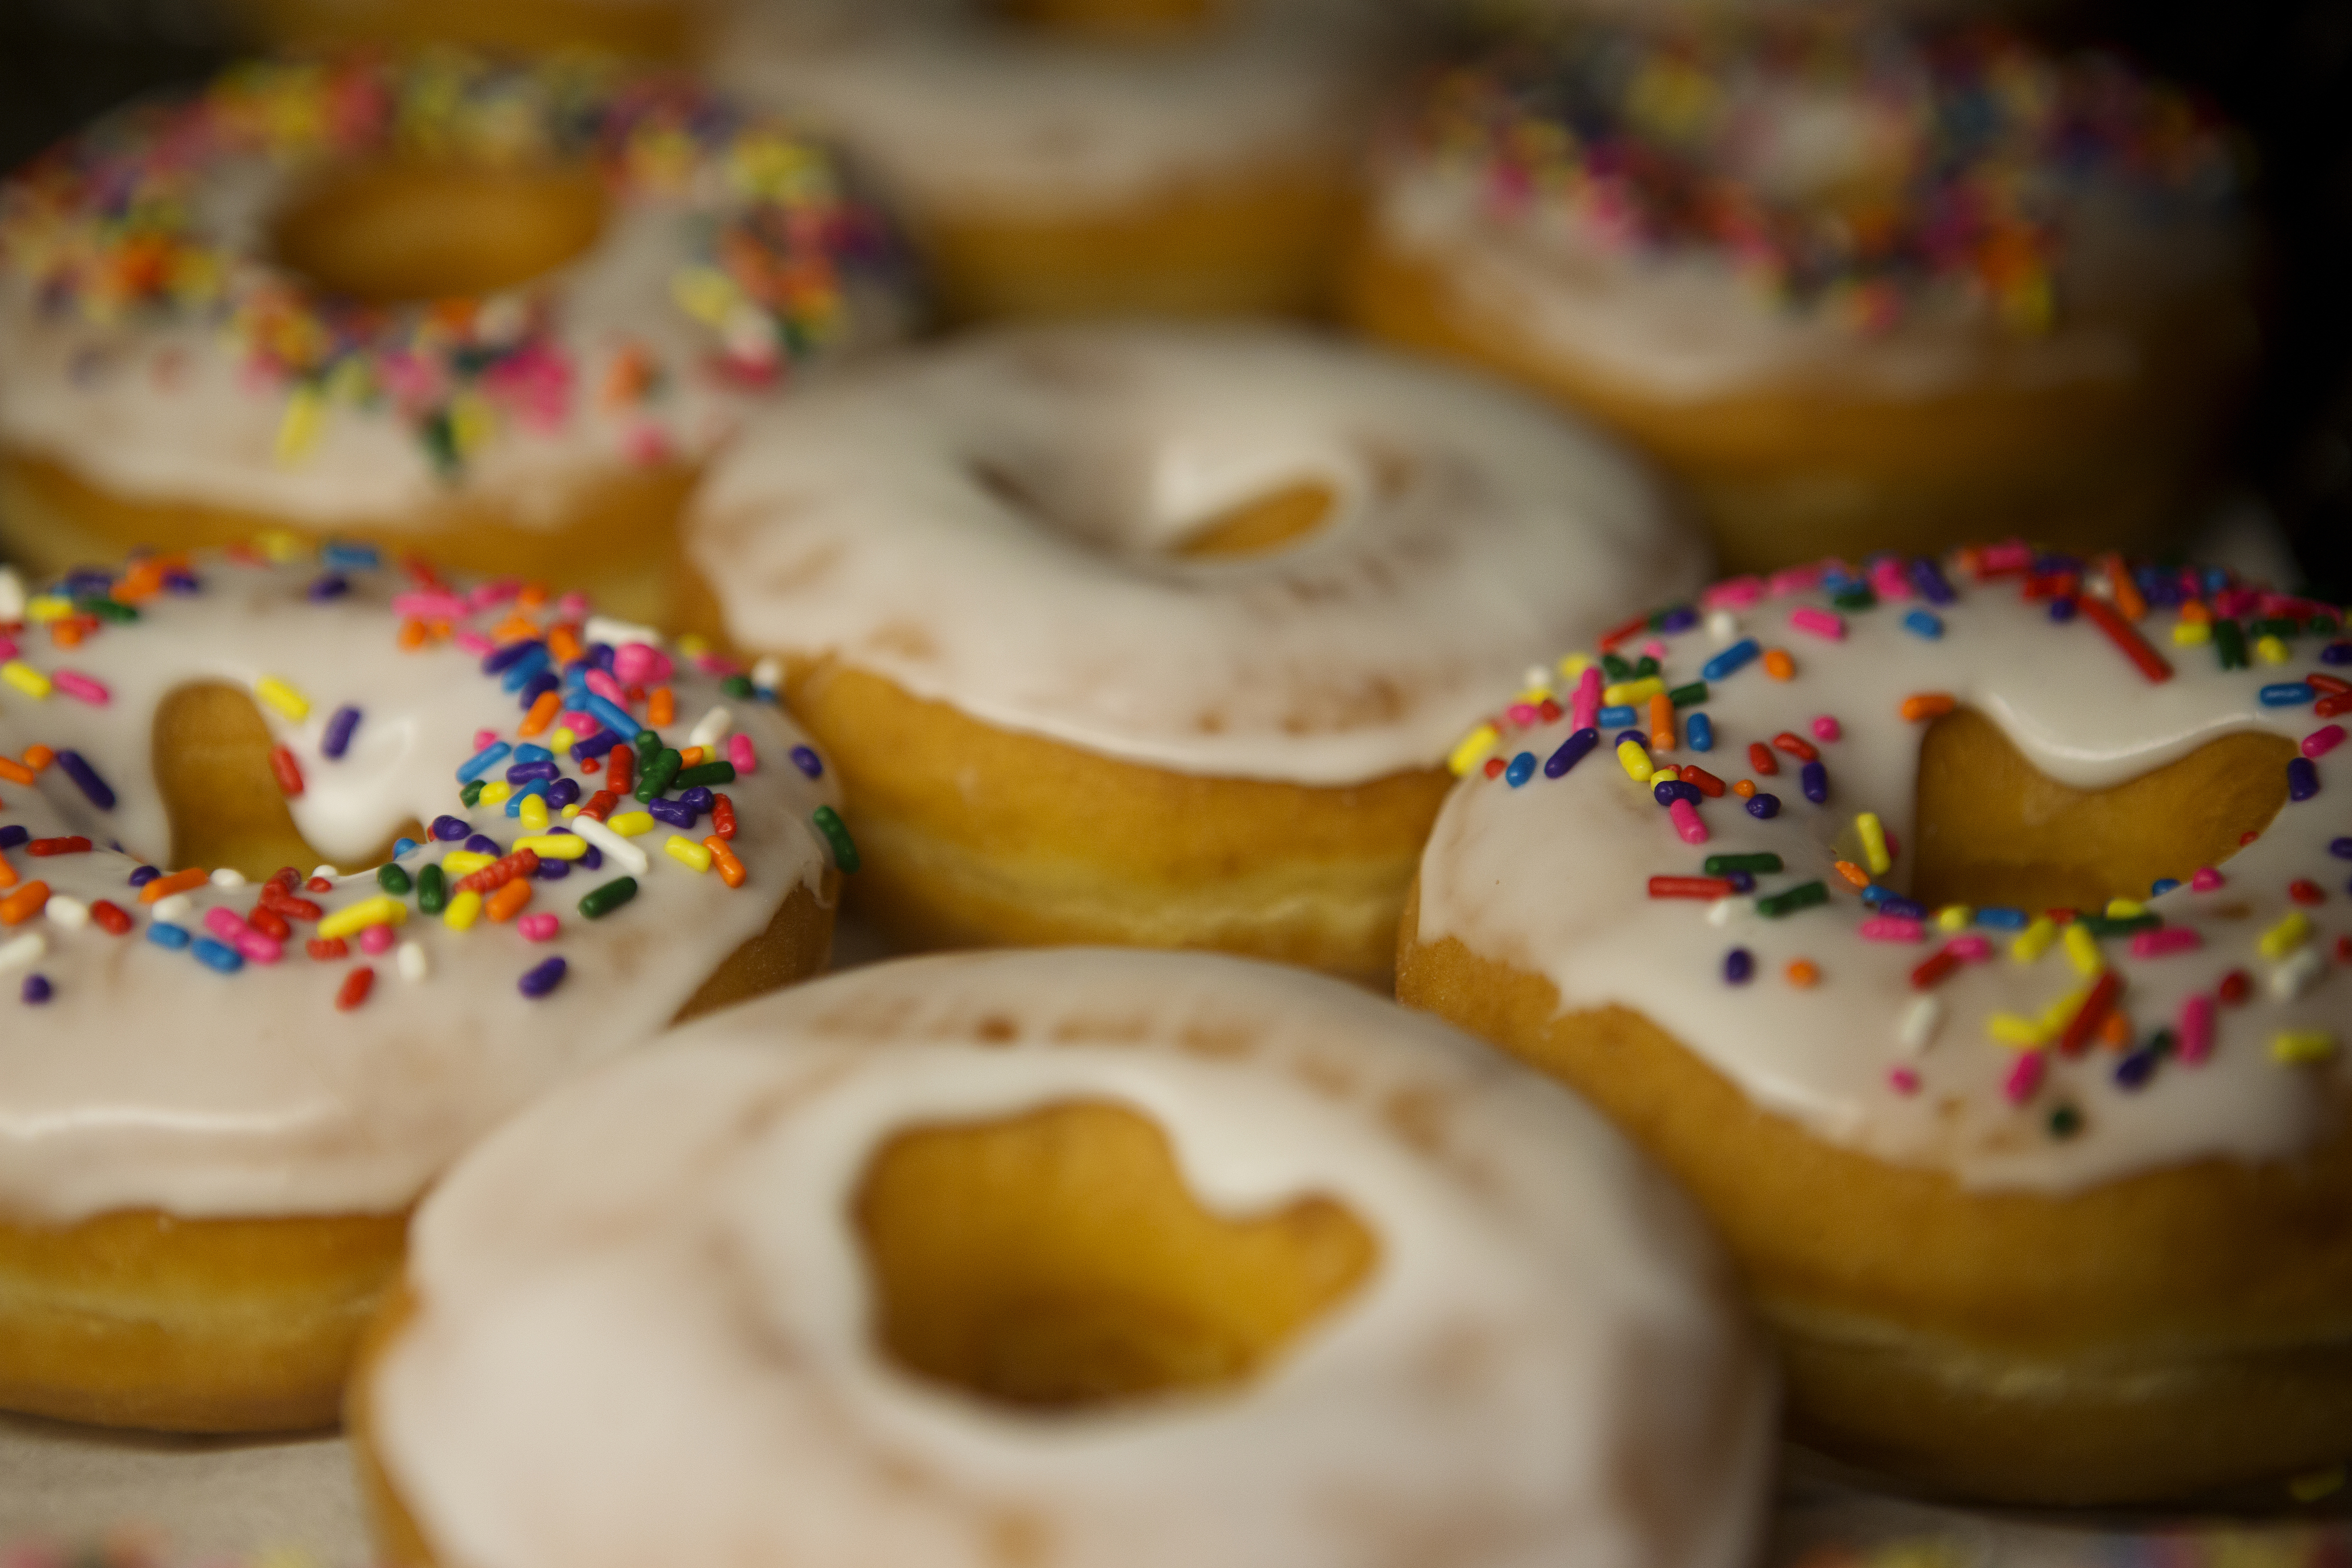 Dunkin' Donuts Inc. restaurant in New York, U.S., on Feb. 24, 2014. (Bloomberg/Getty Images)